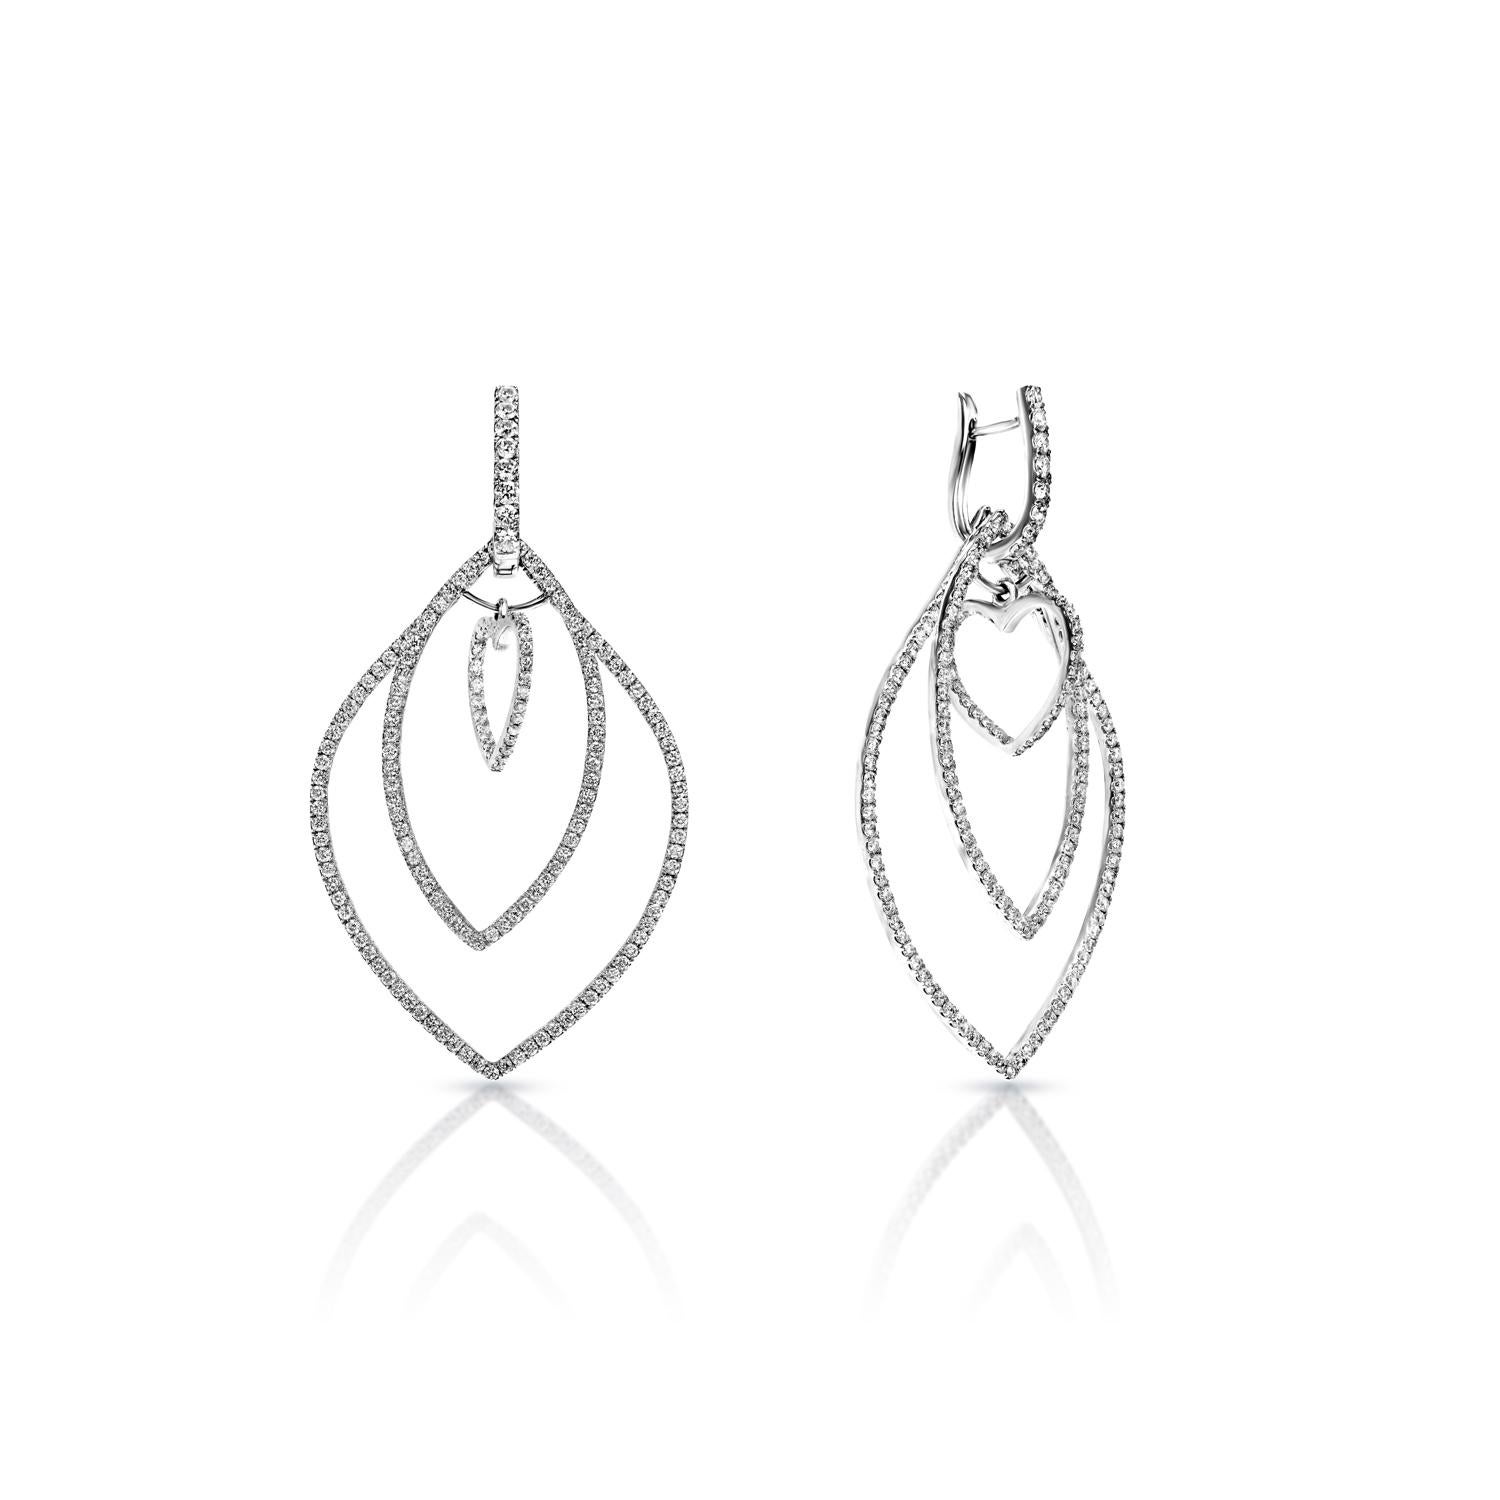 Round Cut 9 Carat Round Brilliant Diamond Hanging Earrings Certified For Sale